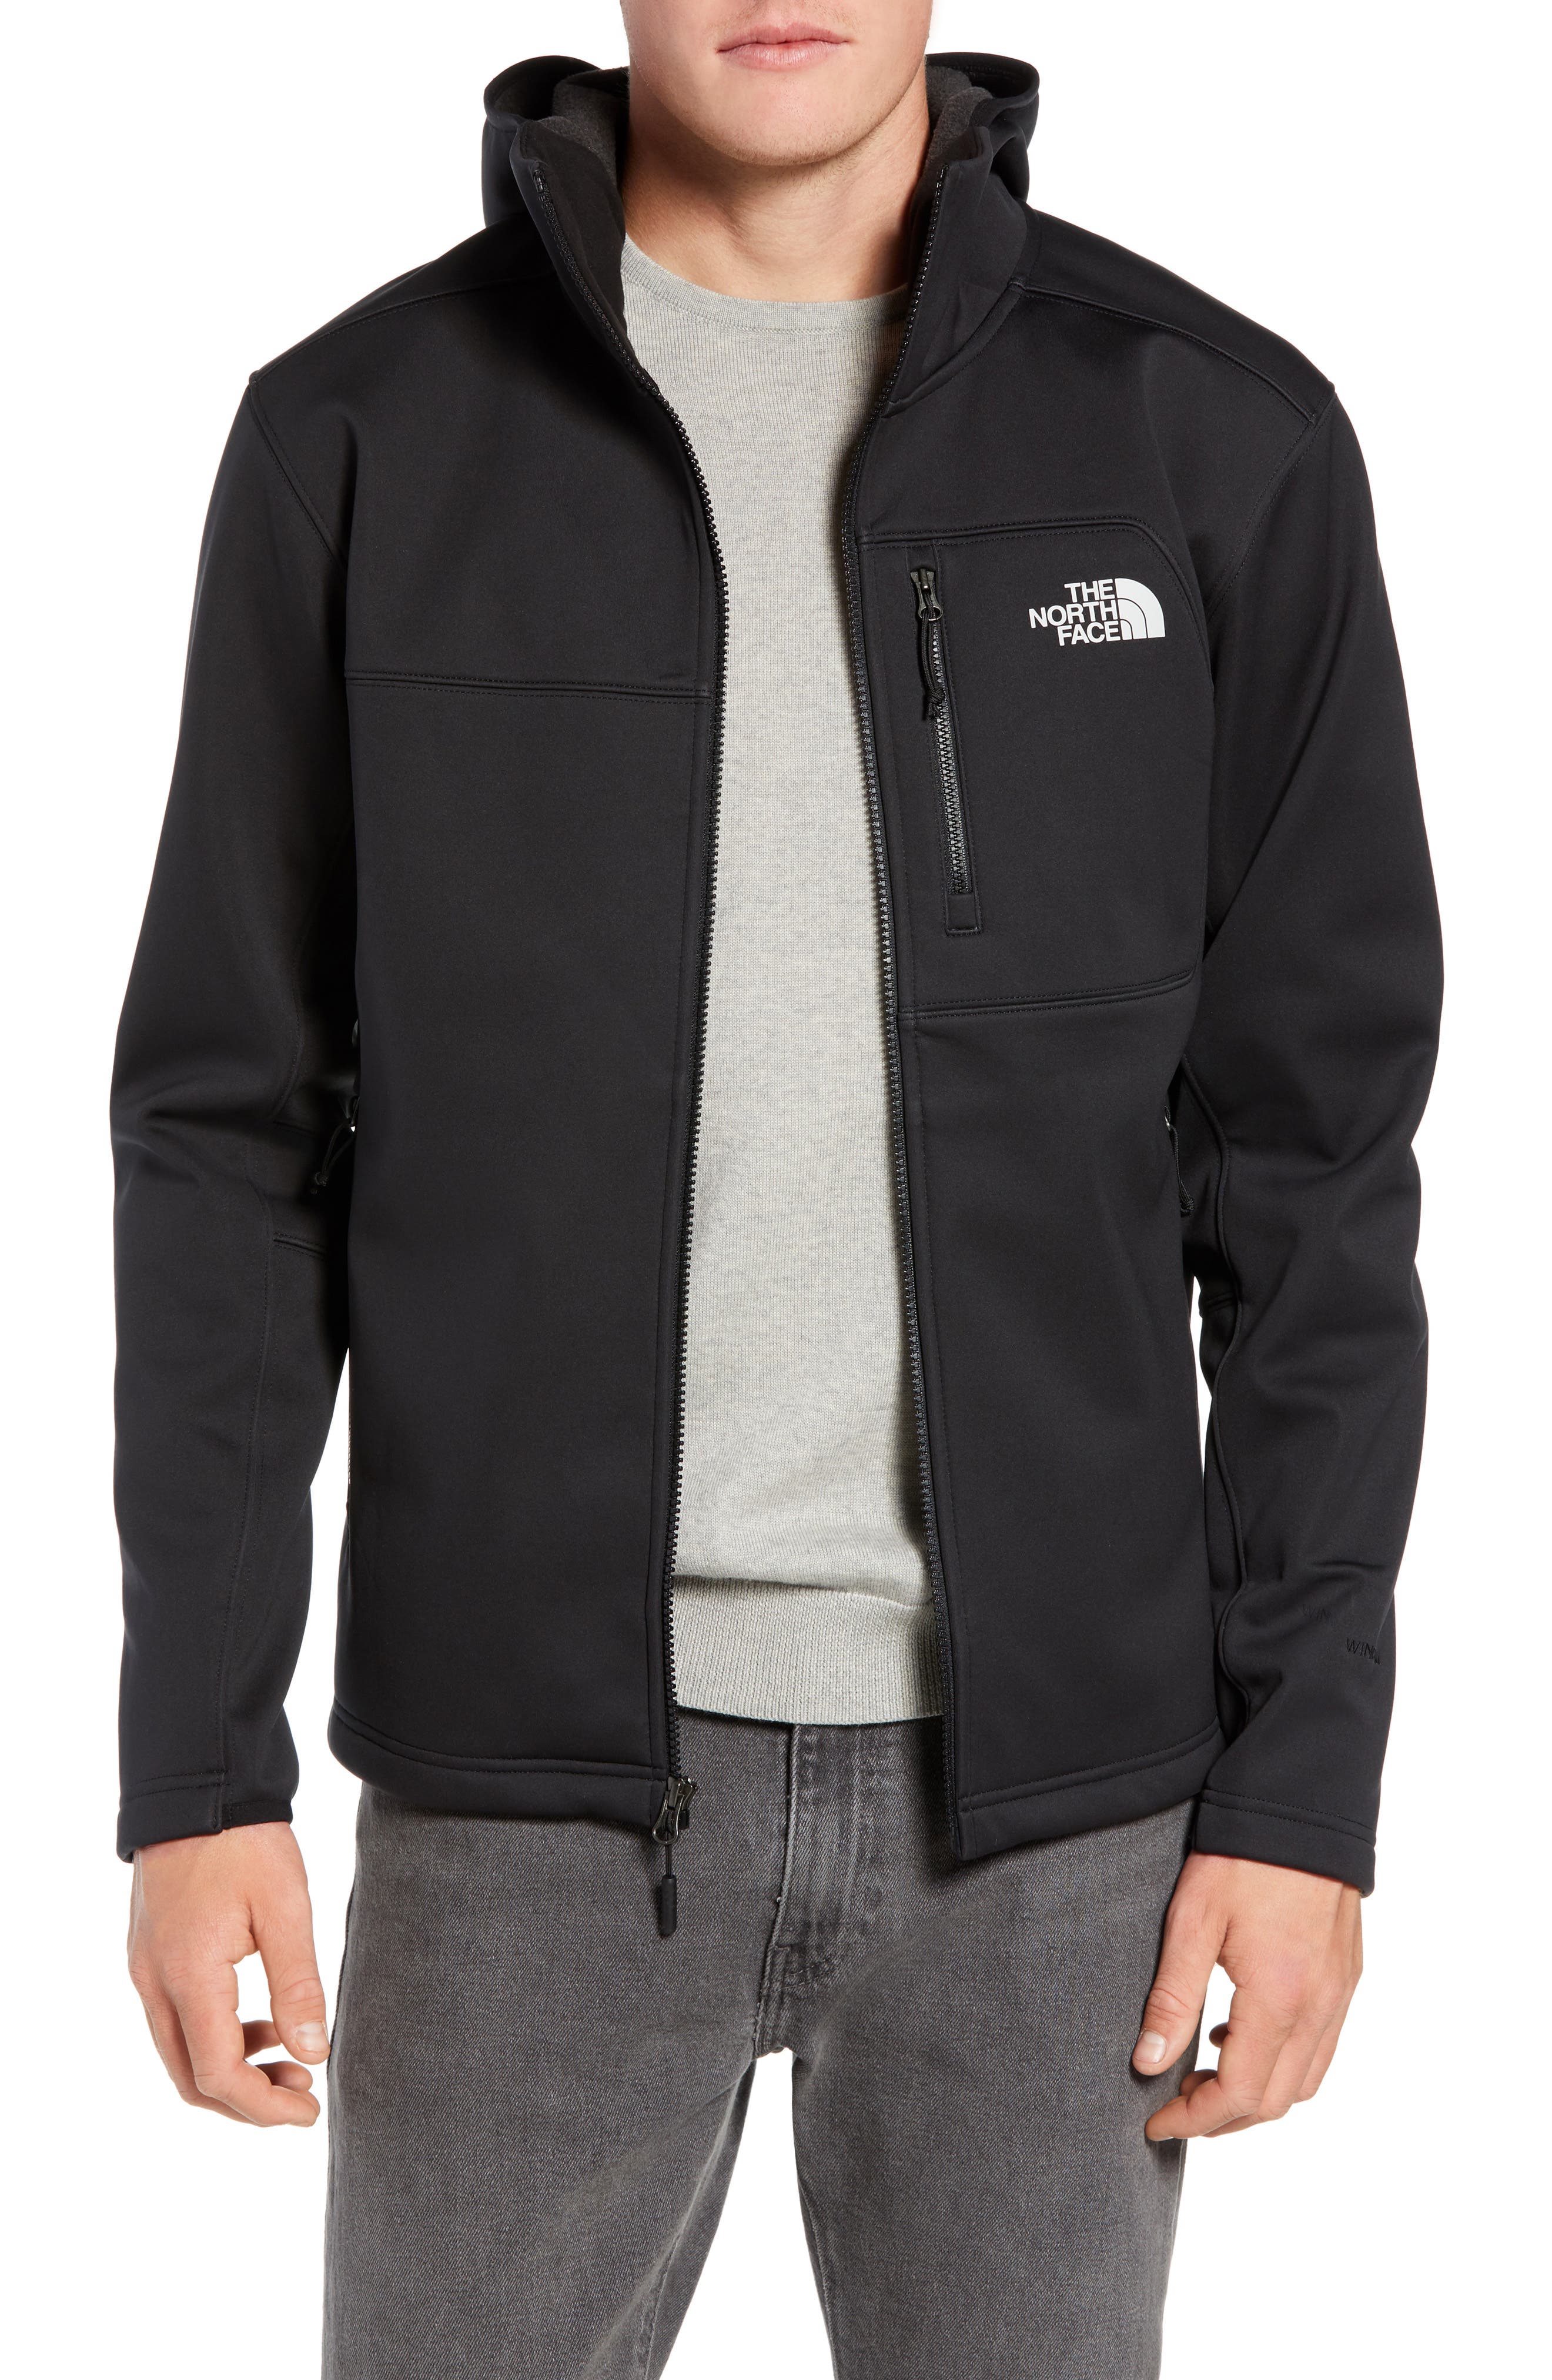 the north face men's apex risor hoodie